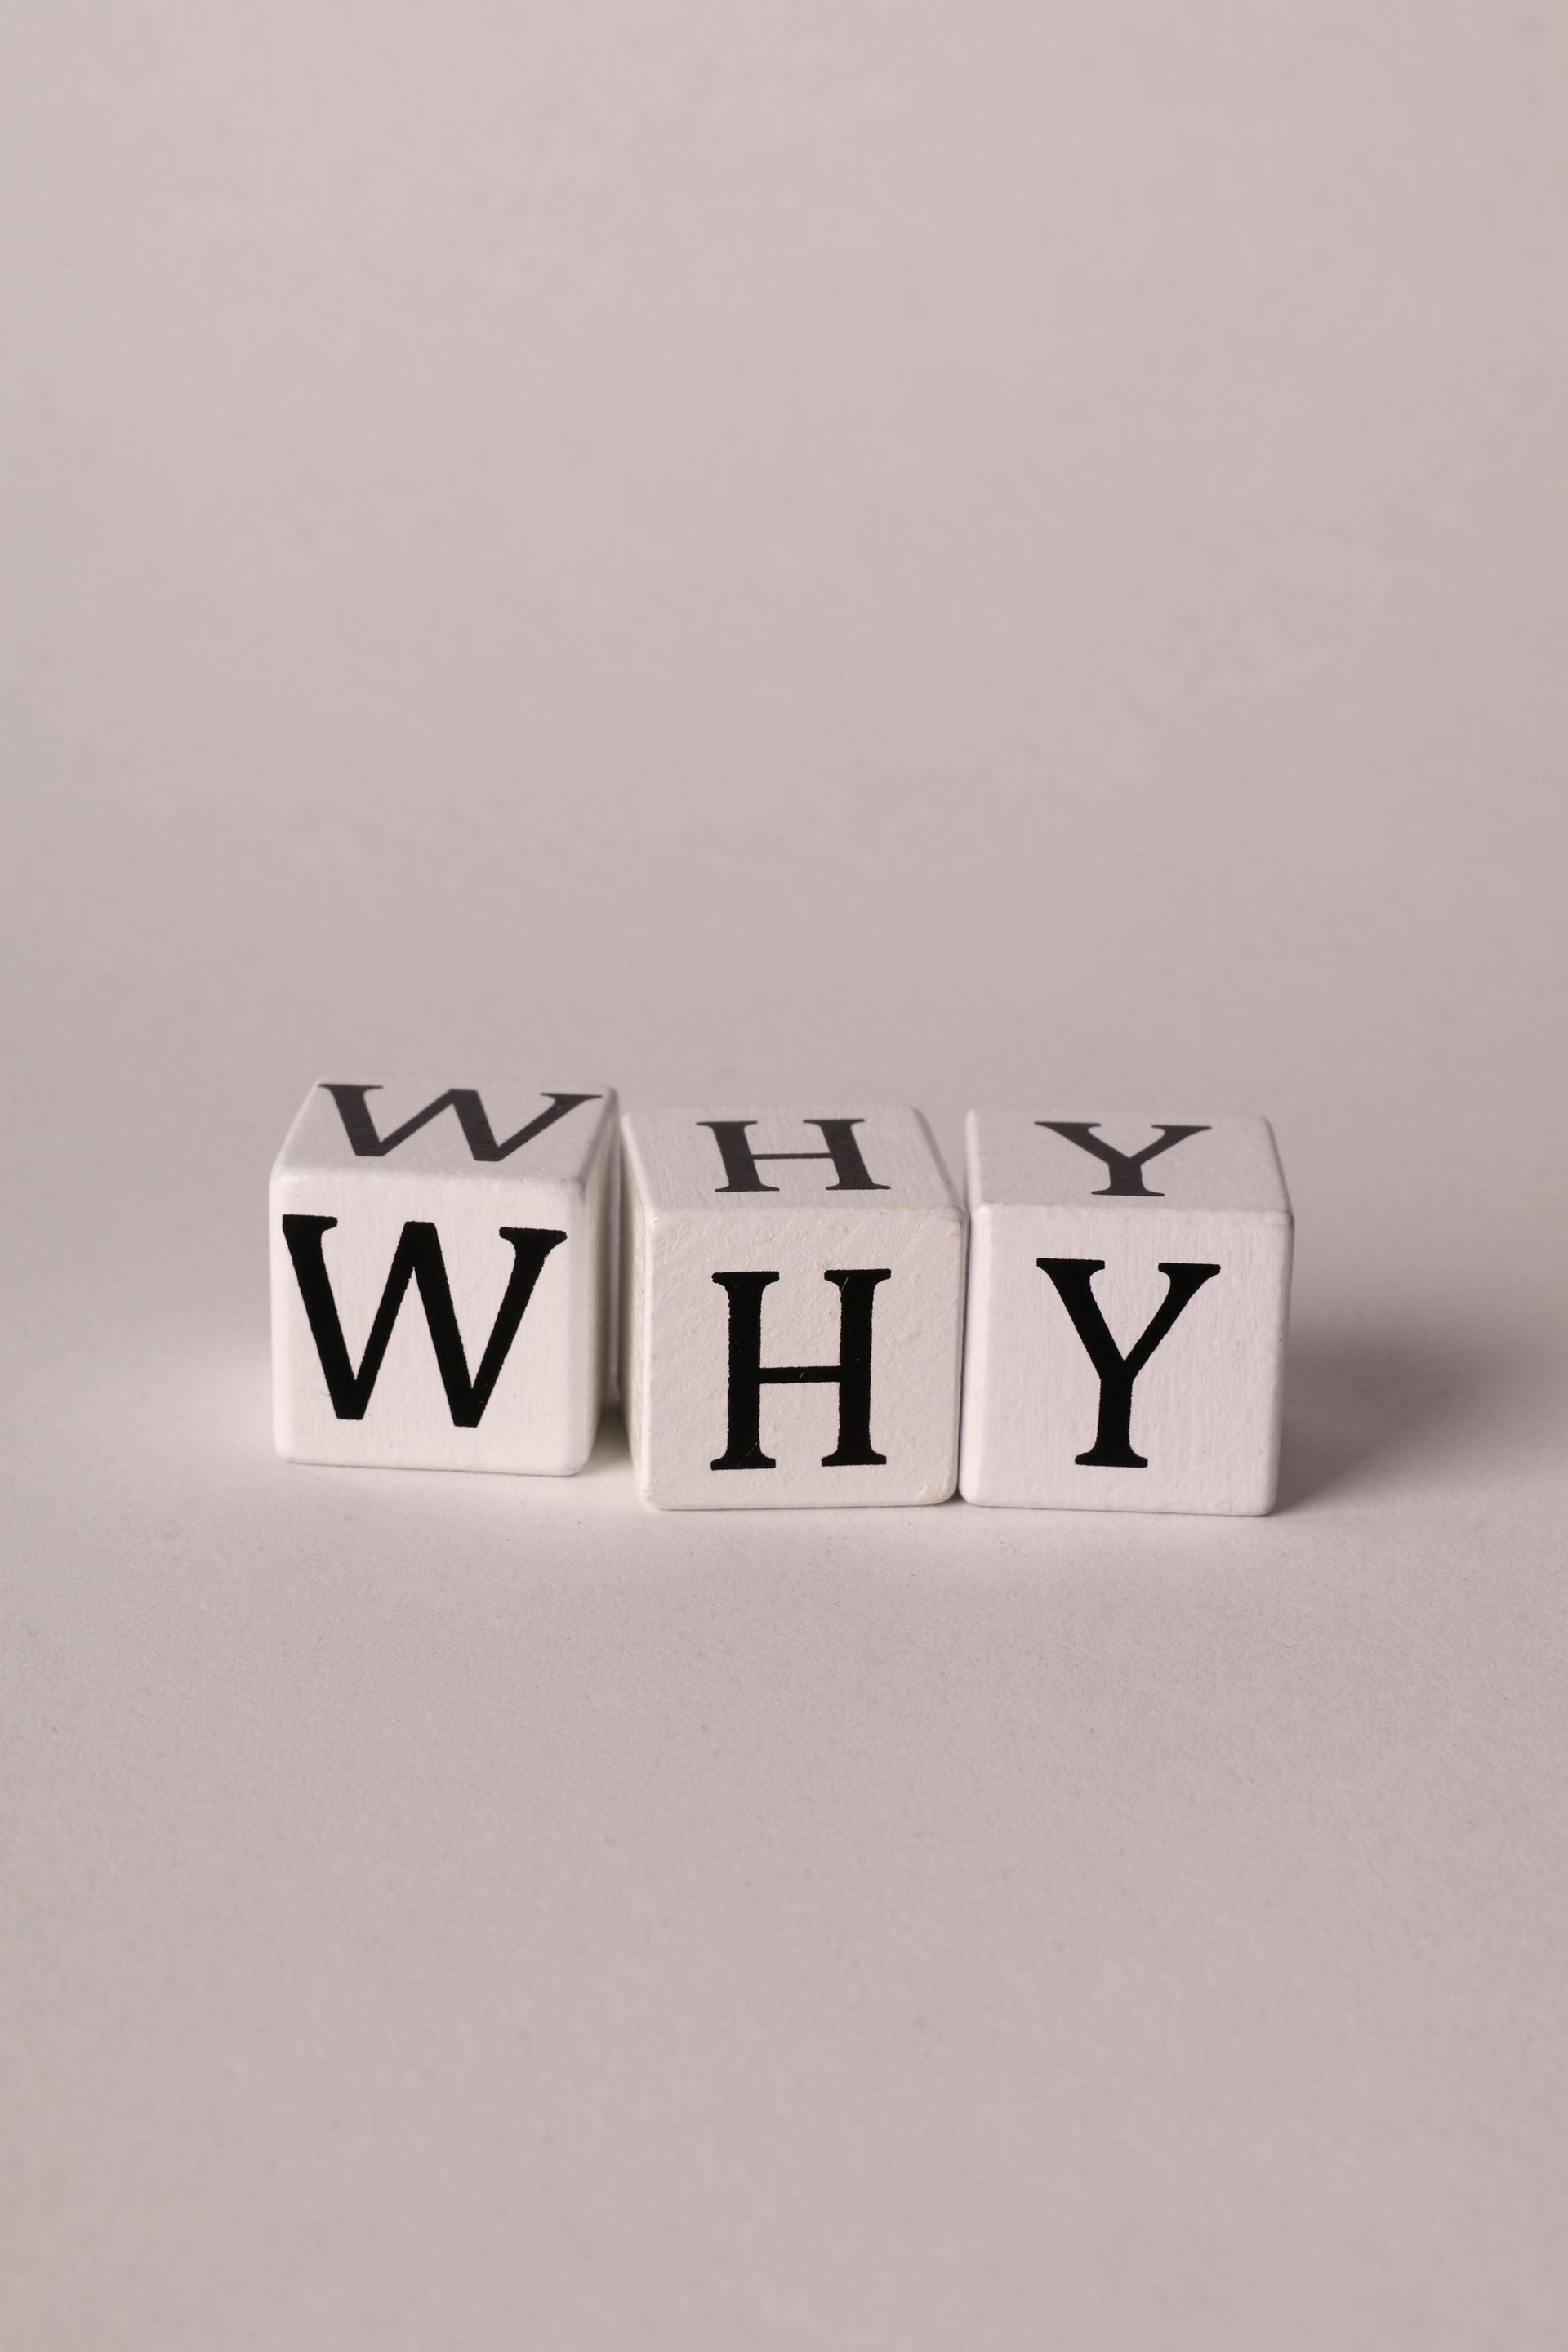 The Why Report will help you analyze portfolio managers when 